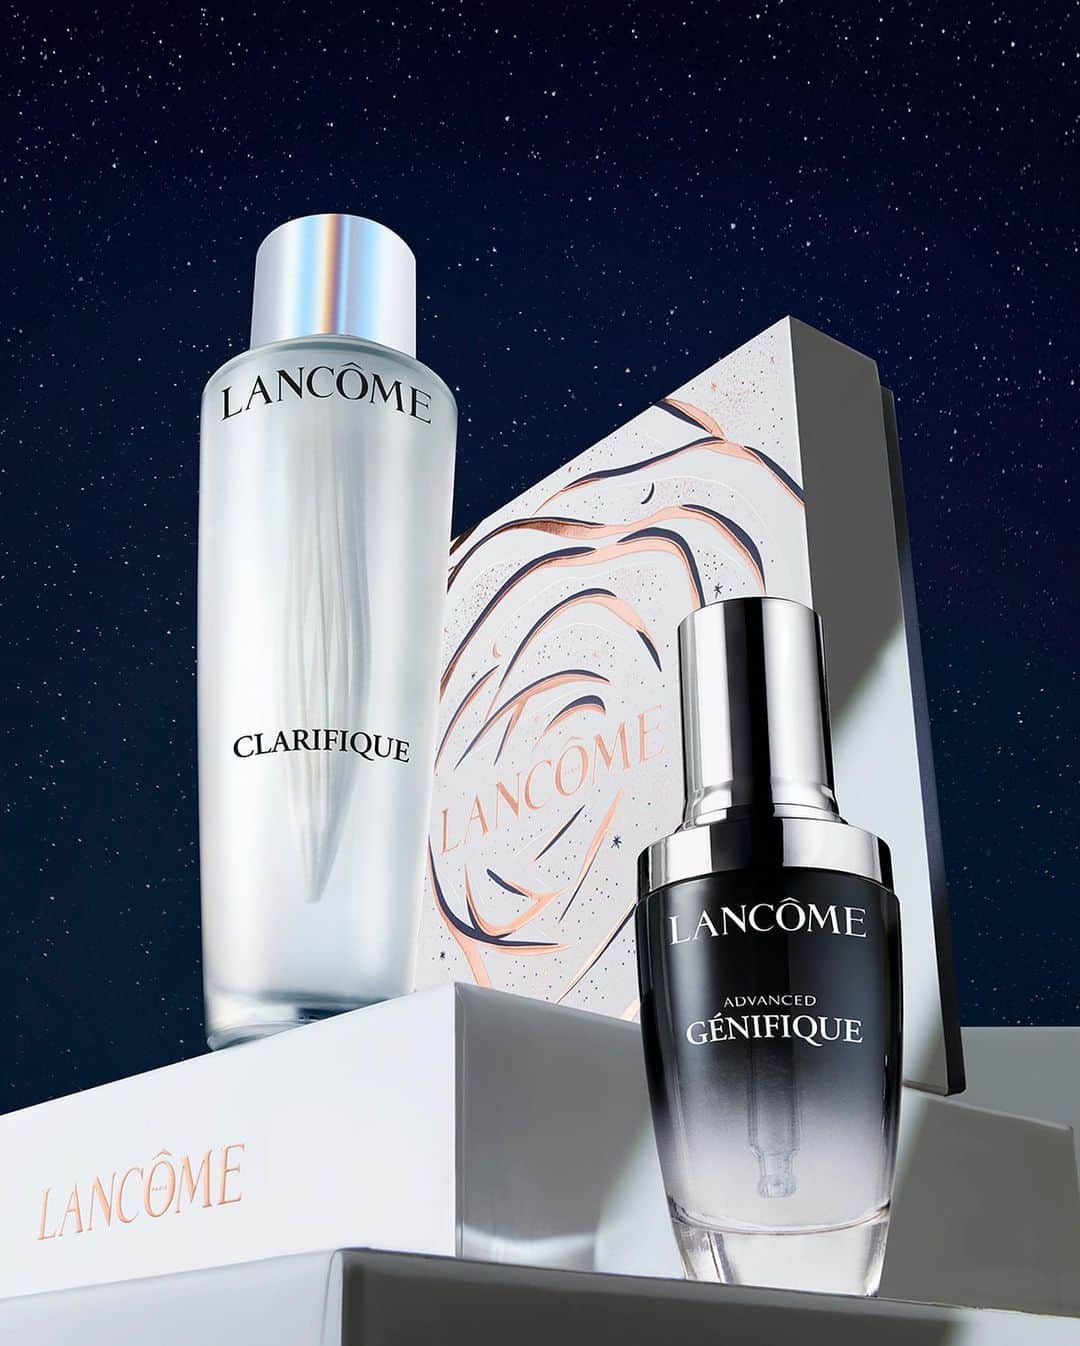 Lancôme Officialのインスタグラム：「Gift the extraordinary this Holiday season. For a night of grandeur, discover Lancôme icons: Advanced Génifique Serum, Advanced Génifique Eyes and Clarifique Dual Essence. Unwrap the true essence of the extraordinary.  #Lancome #LancomexLouvre #Holiday23」